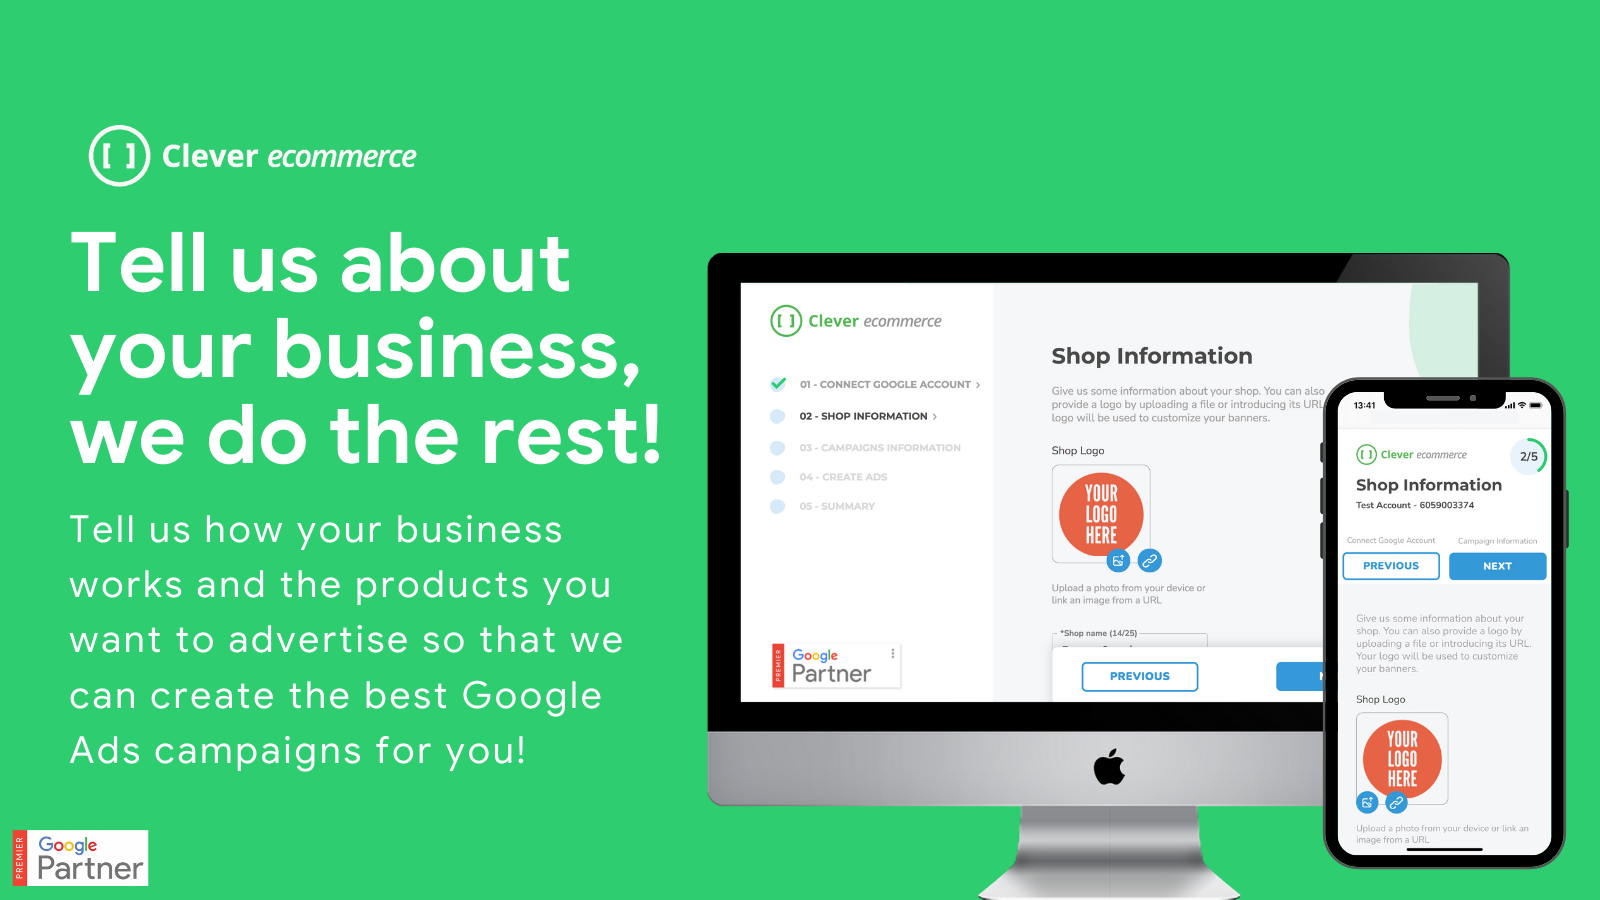 Clever will personalize the Google Ads that works to your business’ advantage